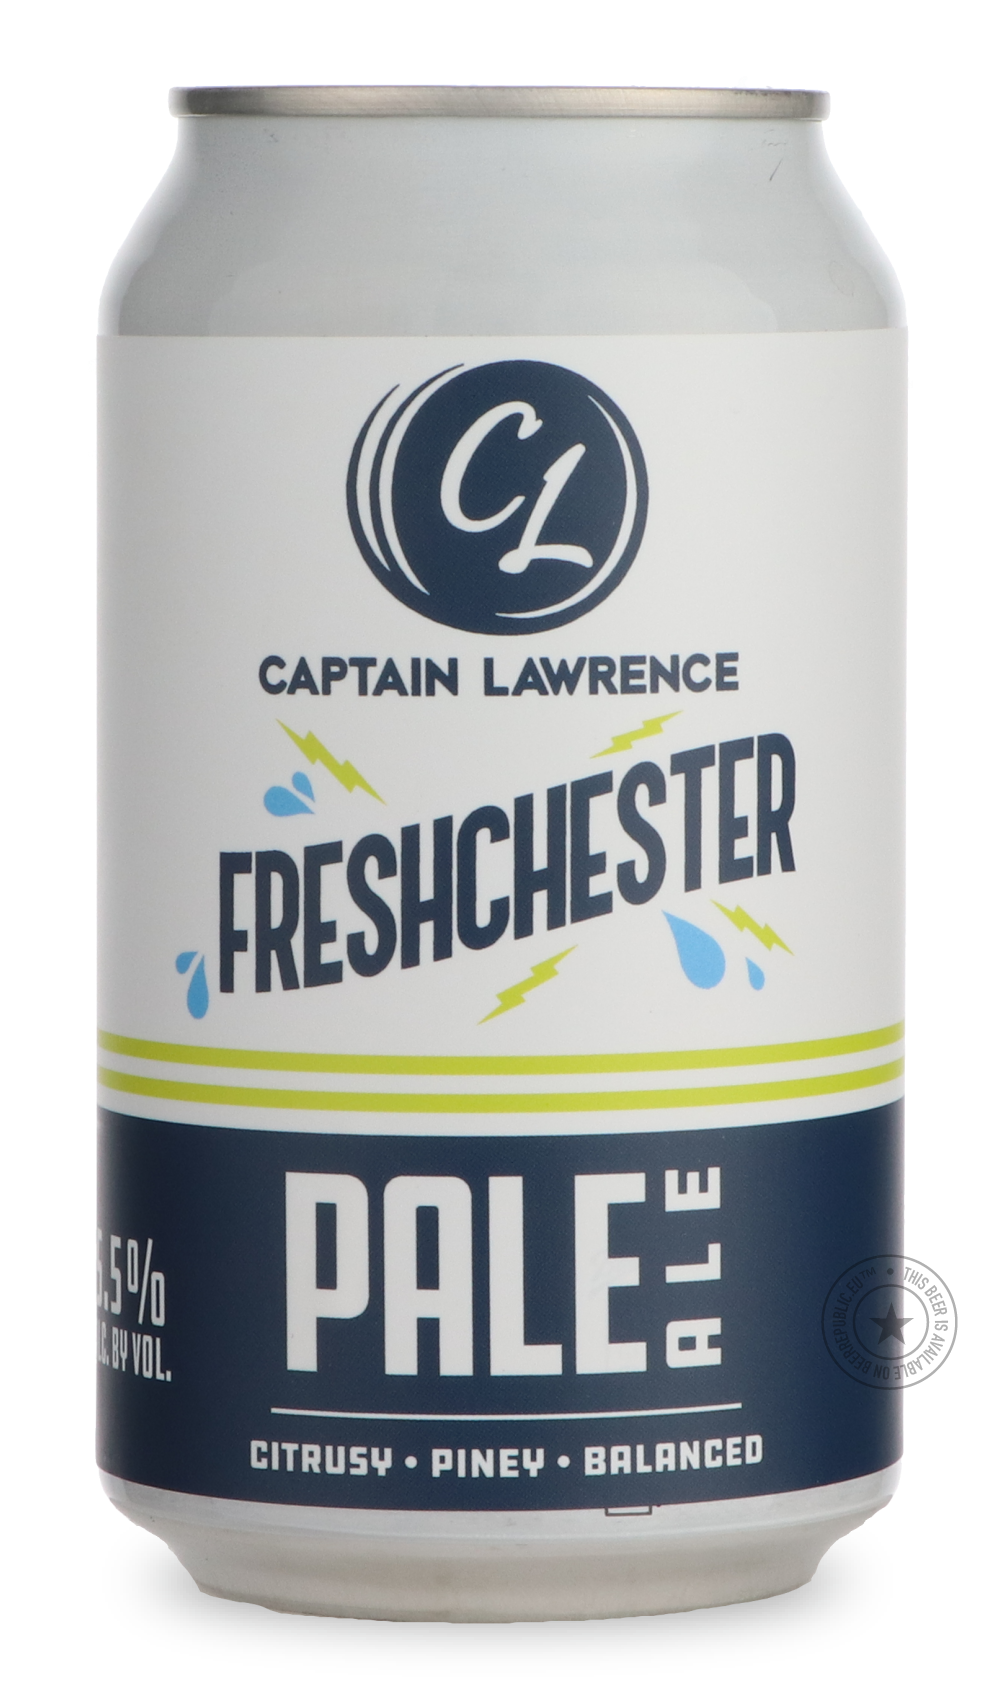 -Captain Lawrence- Freshchester-IPA- Only @ Beer Republic - The best online beer store for American & Canadian craft beer - Buy beer online from the USA and Canada - Bier online kopen - Amerikaans bier kopen - Craft beer store - Craft beer kopen - Amerikanisch bier kaufen - Bier online kaufen - Acheter biere online - IPA - Stout - Porter - New England IPA - Hazy IPA - Imperial Stout - Barrel Aged - Barrel Aged Imperial Stout - Brown - Dark beer - Blond - Blonde - Pilsner - Lager - Wheat - Weizen - Amber - B